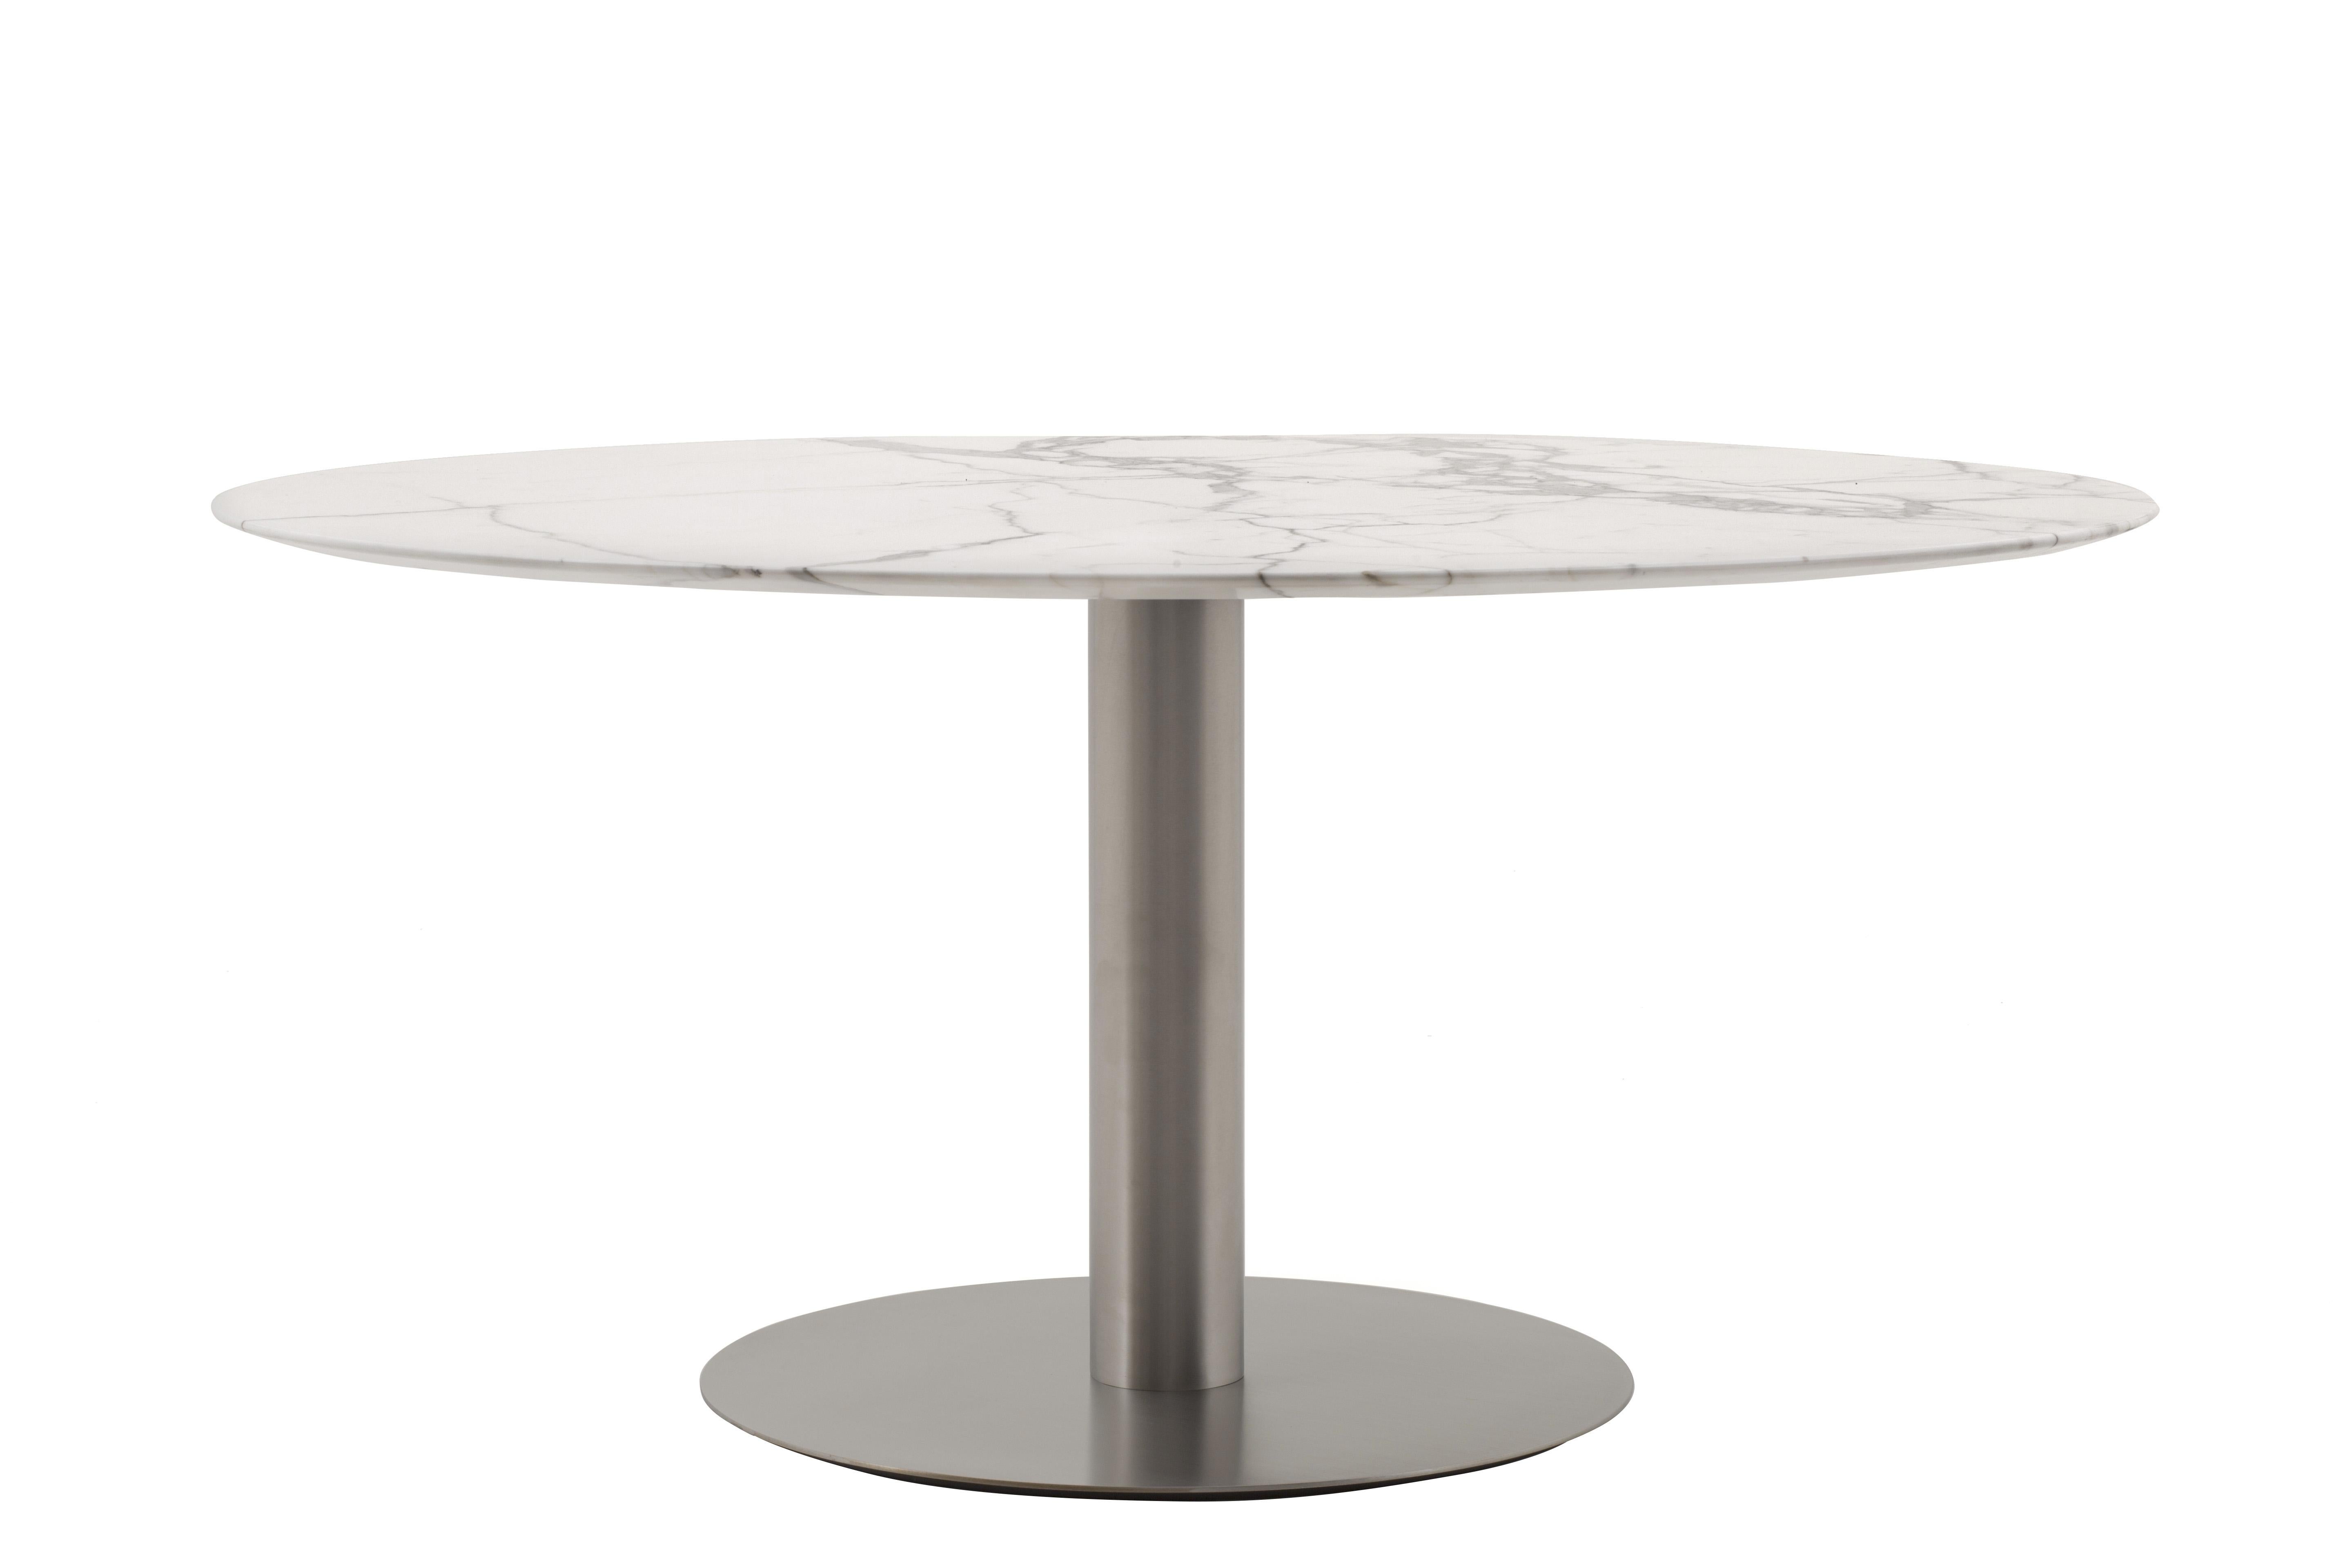 For Sale: White (521_WHITE CARRARA MARBLE) Break Table in Stainless Steel or Matte Lacquer Finish by Giulio Cappellini